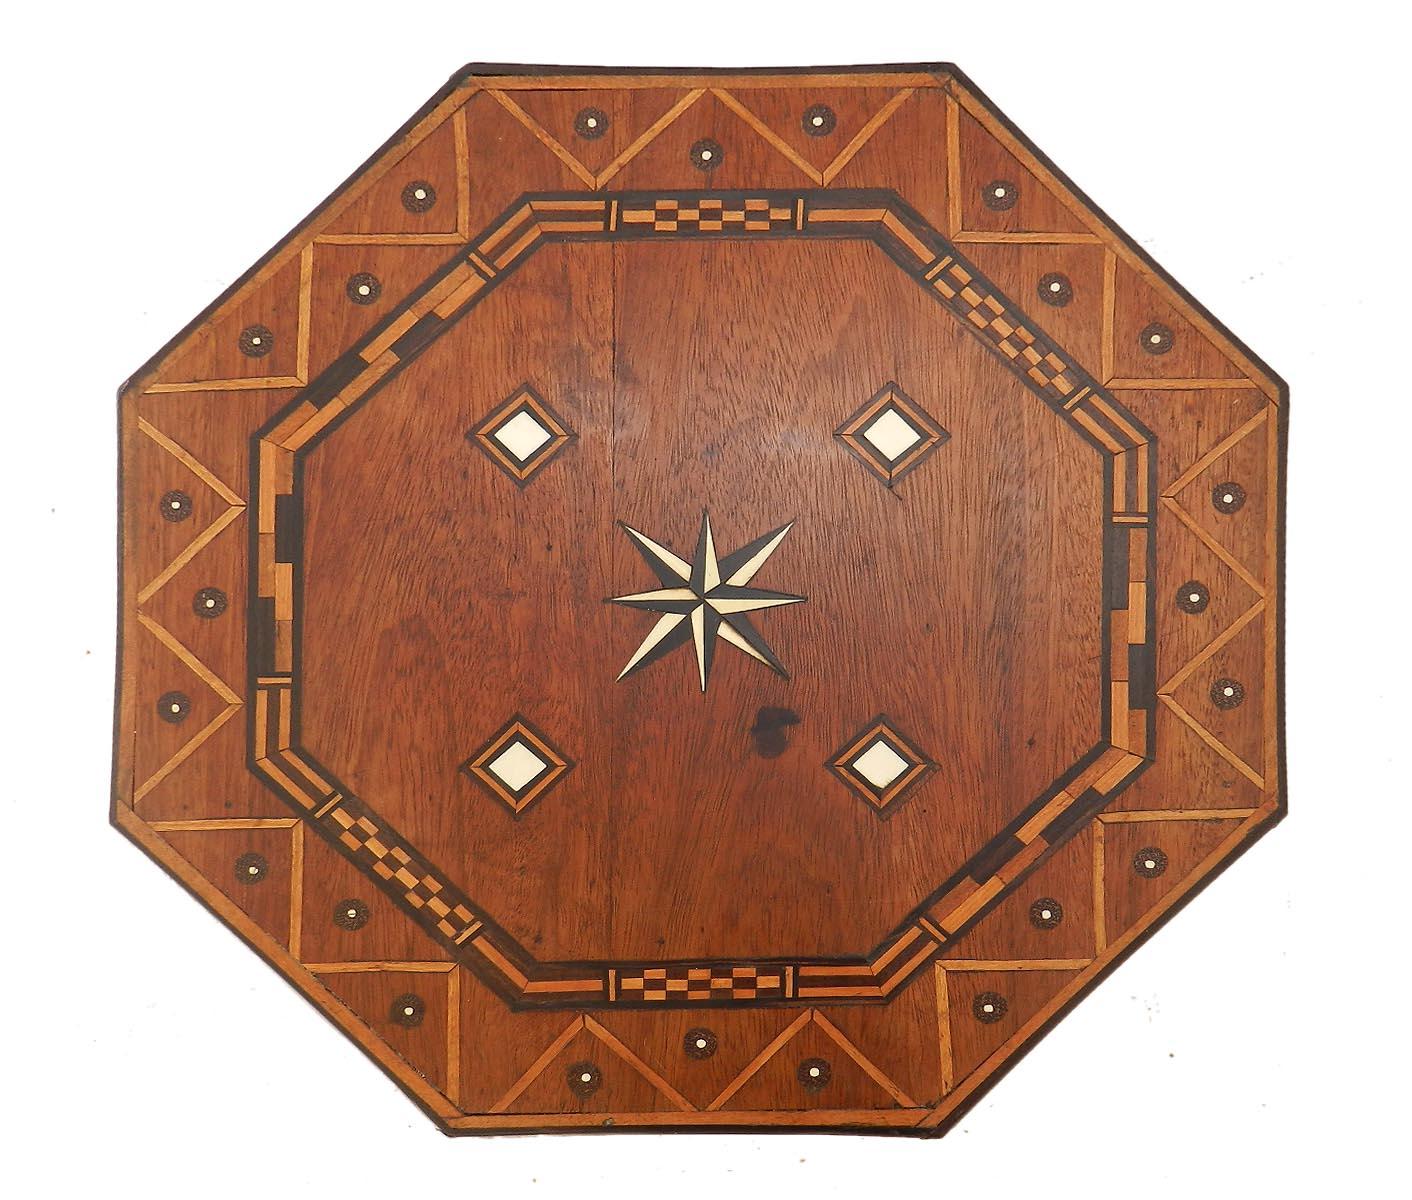 Vintage Moroccan inlaid side table
Original Moorish games or sewing table
The octagonal top lifts to reveal compartments
Decorative as well as practical
Very good vintage condition for its age nothing major or distracting
the top has a very